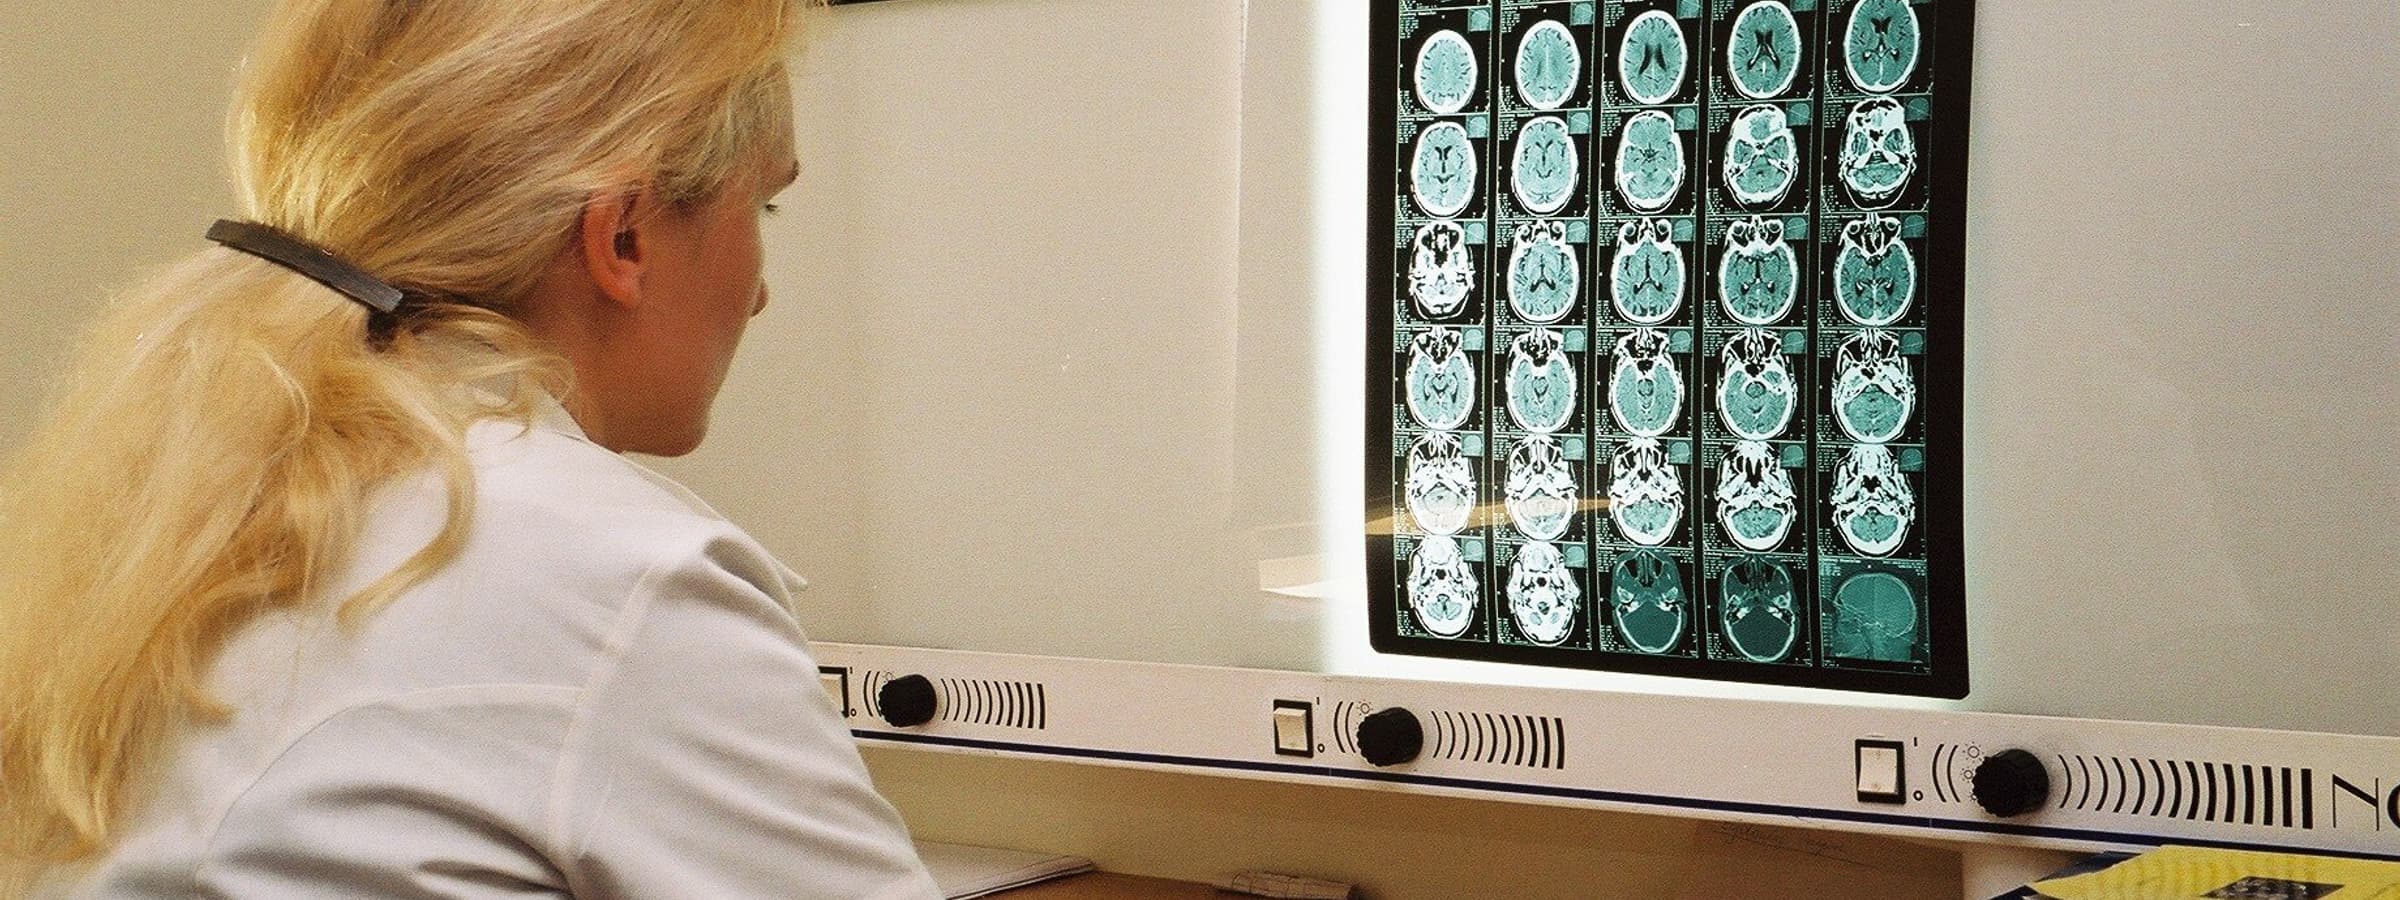 Medical professional analyzing CT scans on a monitor.